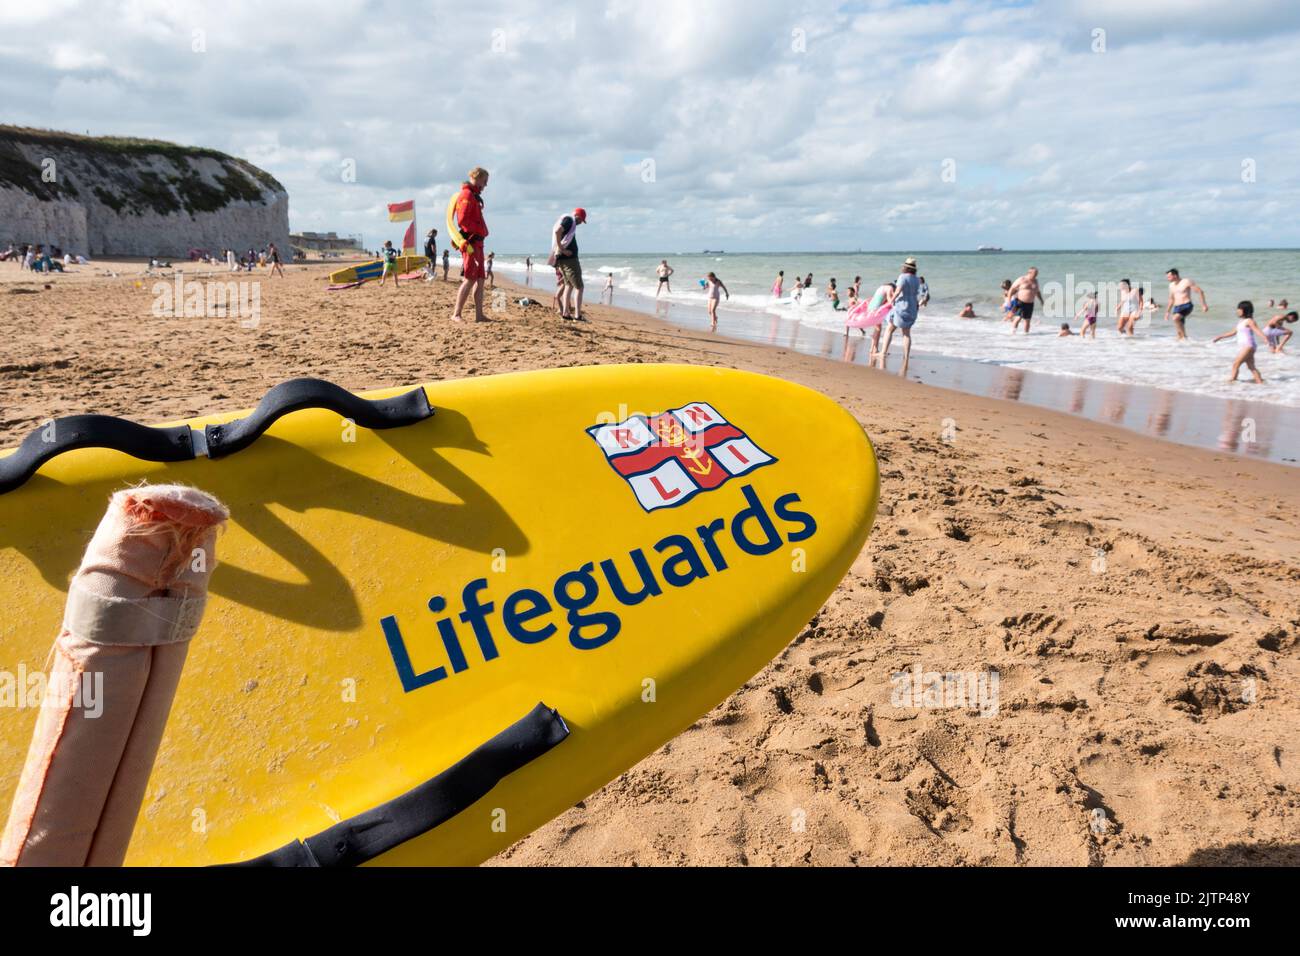 RNLI lifeguards surf boat station on the sand in Botaby Bay beach Stock Photo